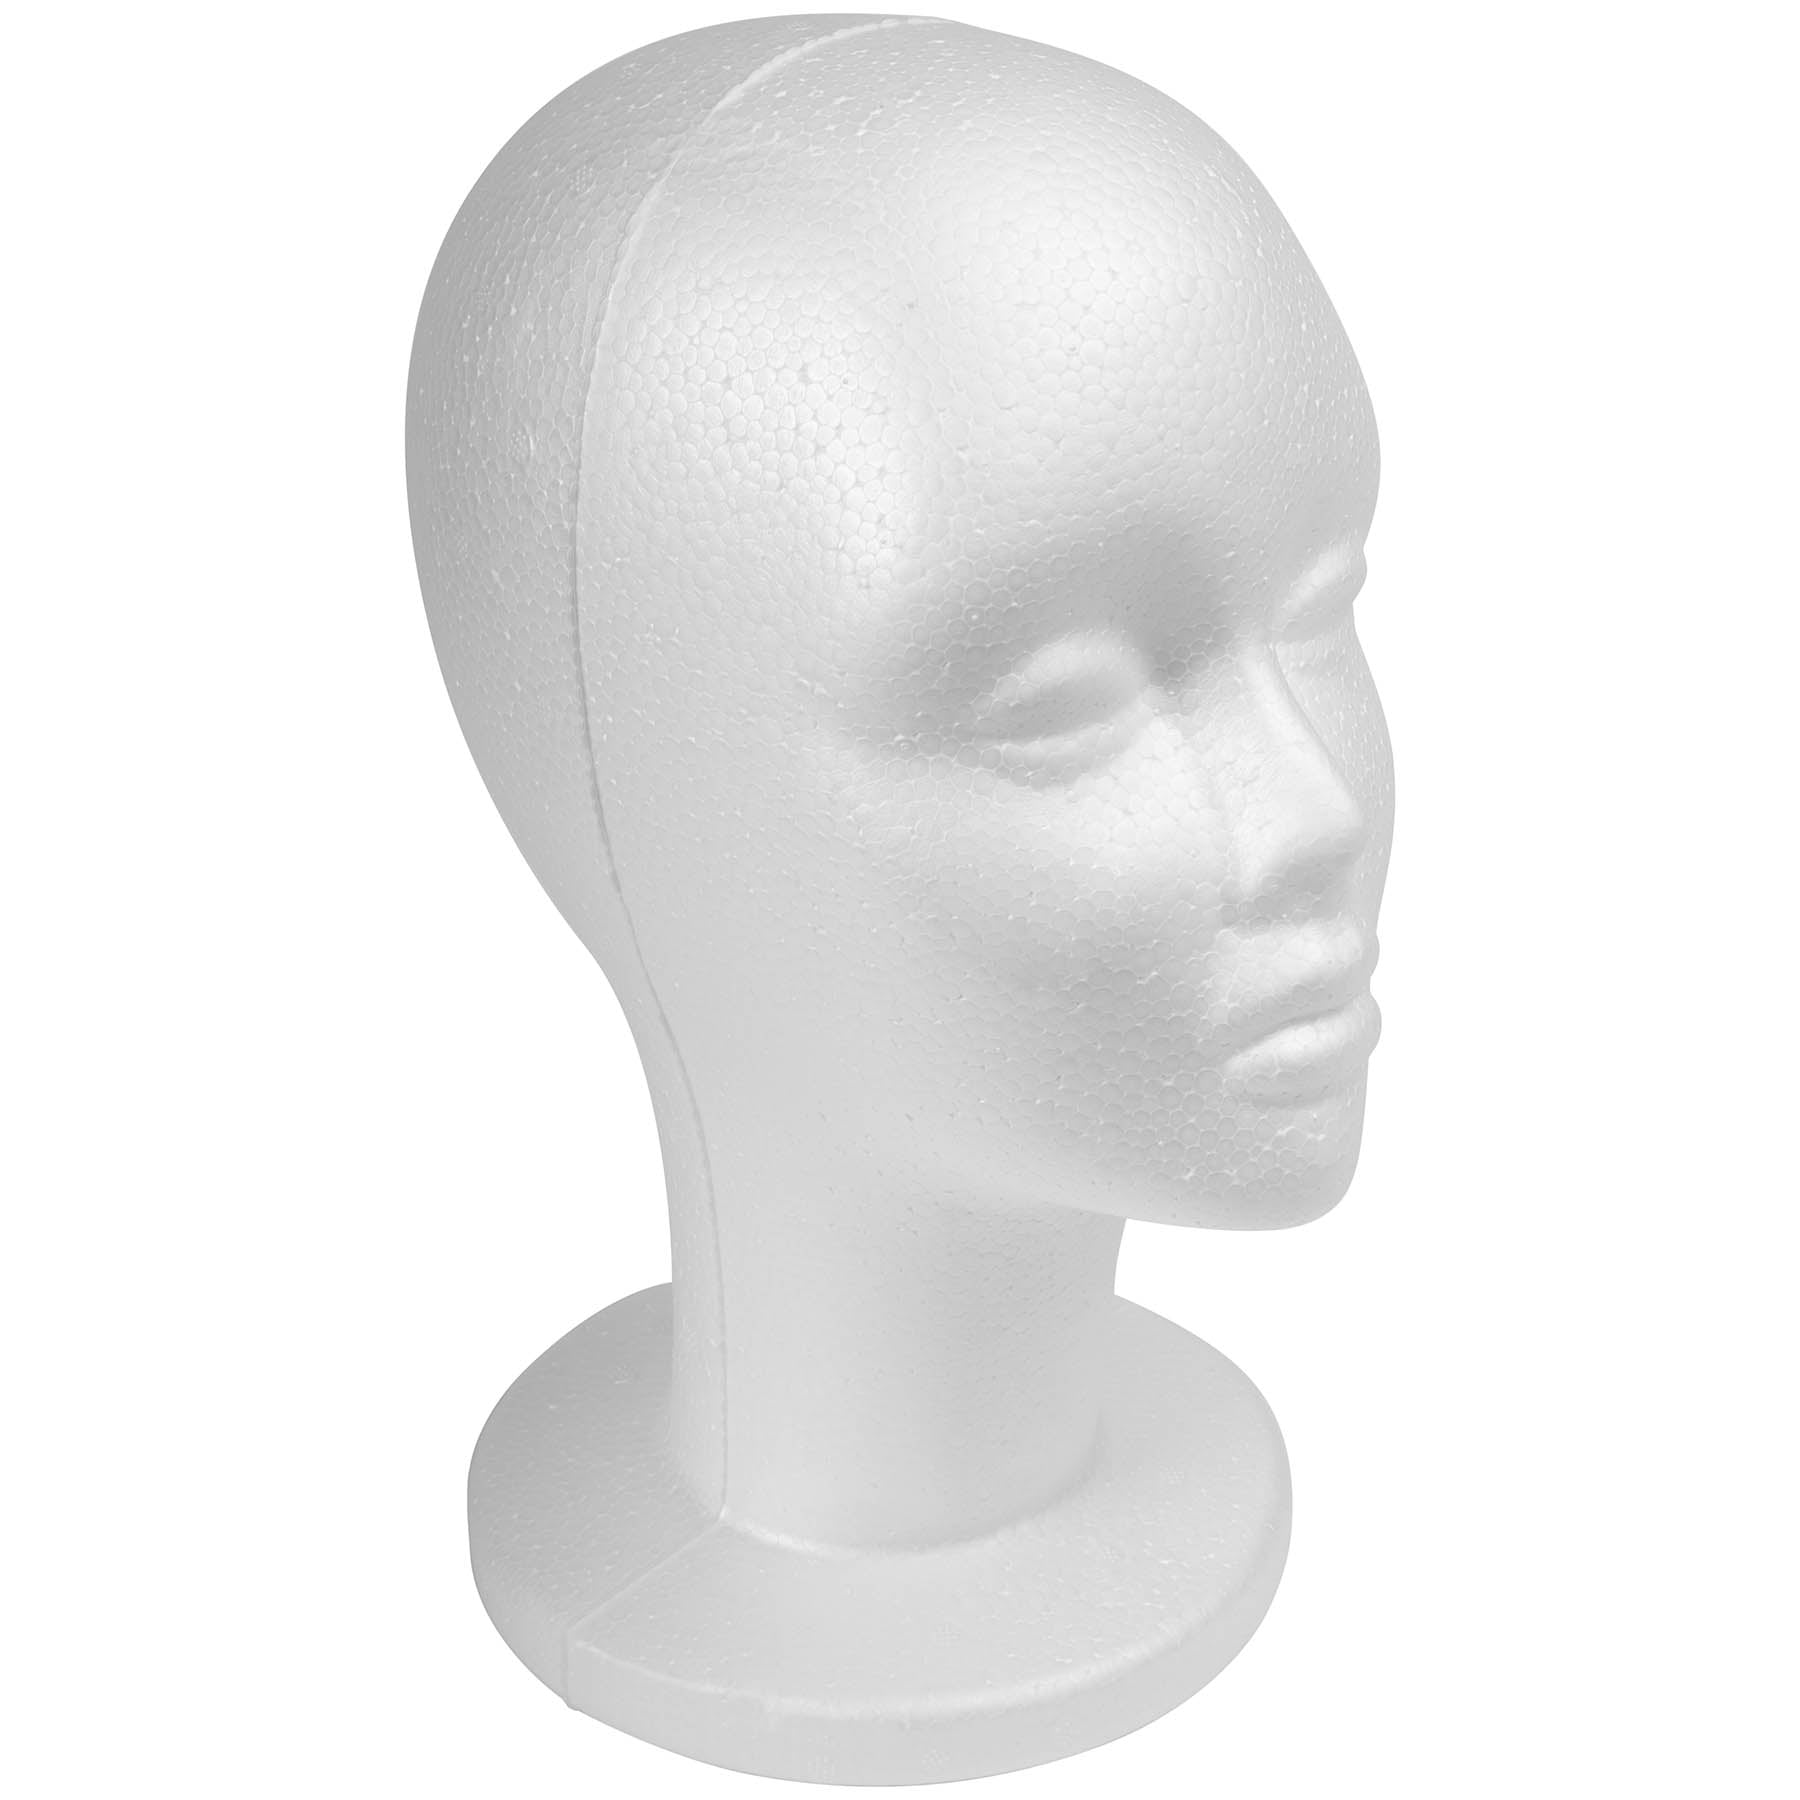 & Hats Male Mannequin Styrofoam 12" Head Bust With Face Display Wigs Glasses 